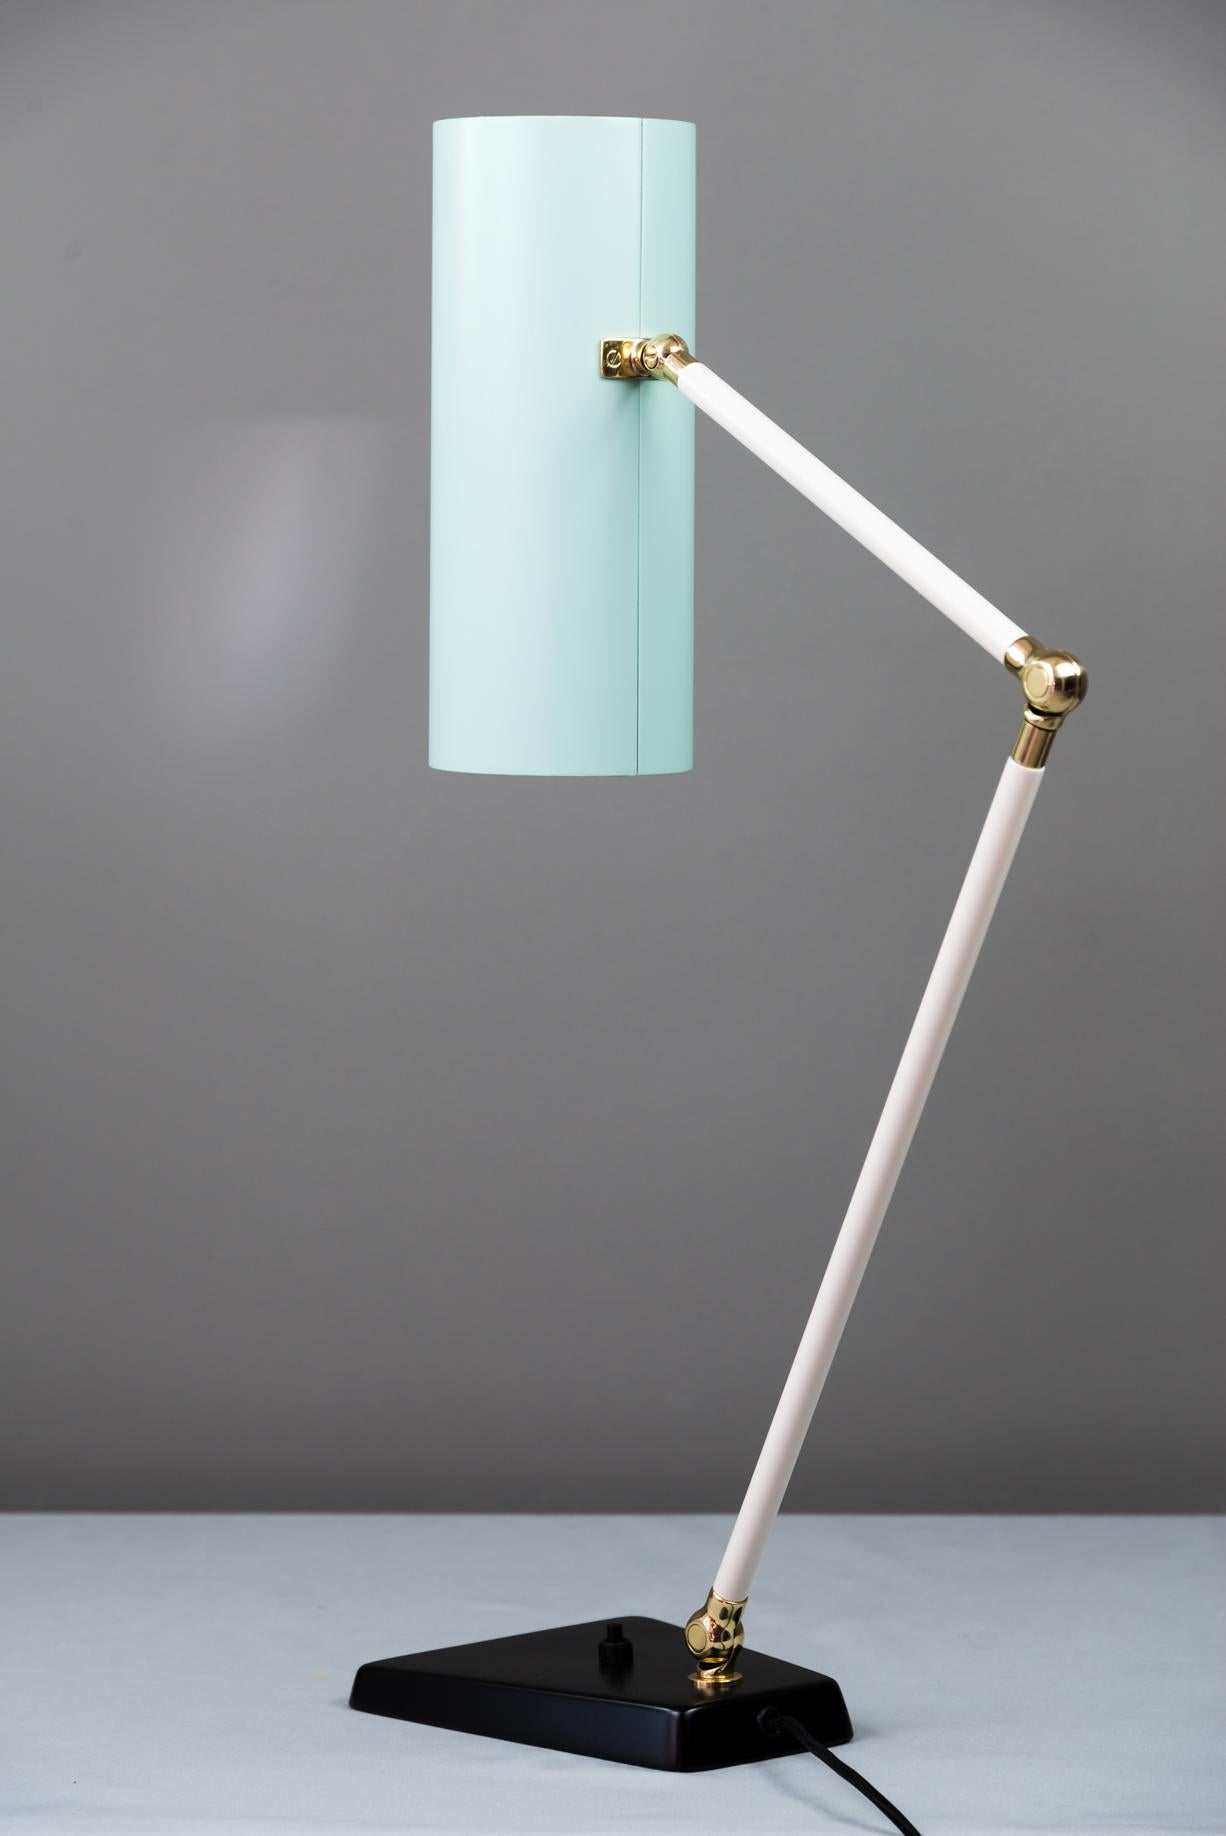 Swiveling J.T. Kalmar table lamp, Vienna, circa 1960s
Restored
Metal and aluminium painted
Brass polished and stove enameled
Completely stretched out is the lamp 84 cm.